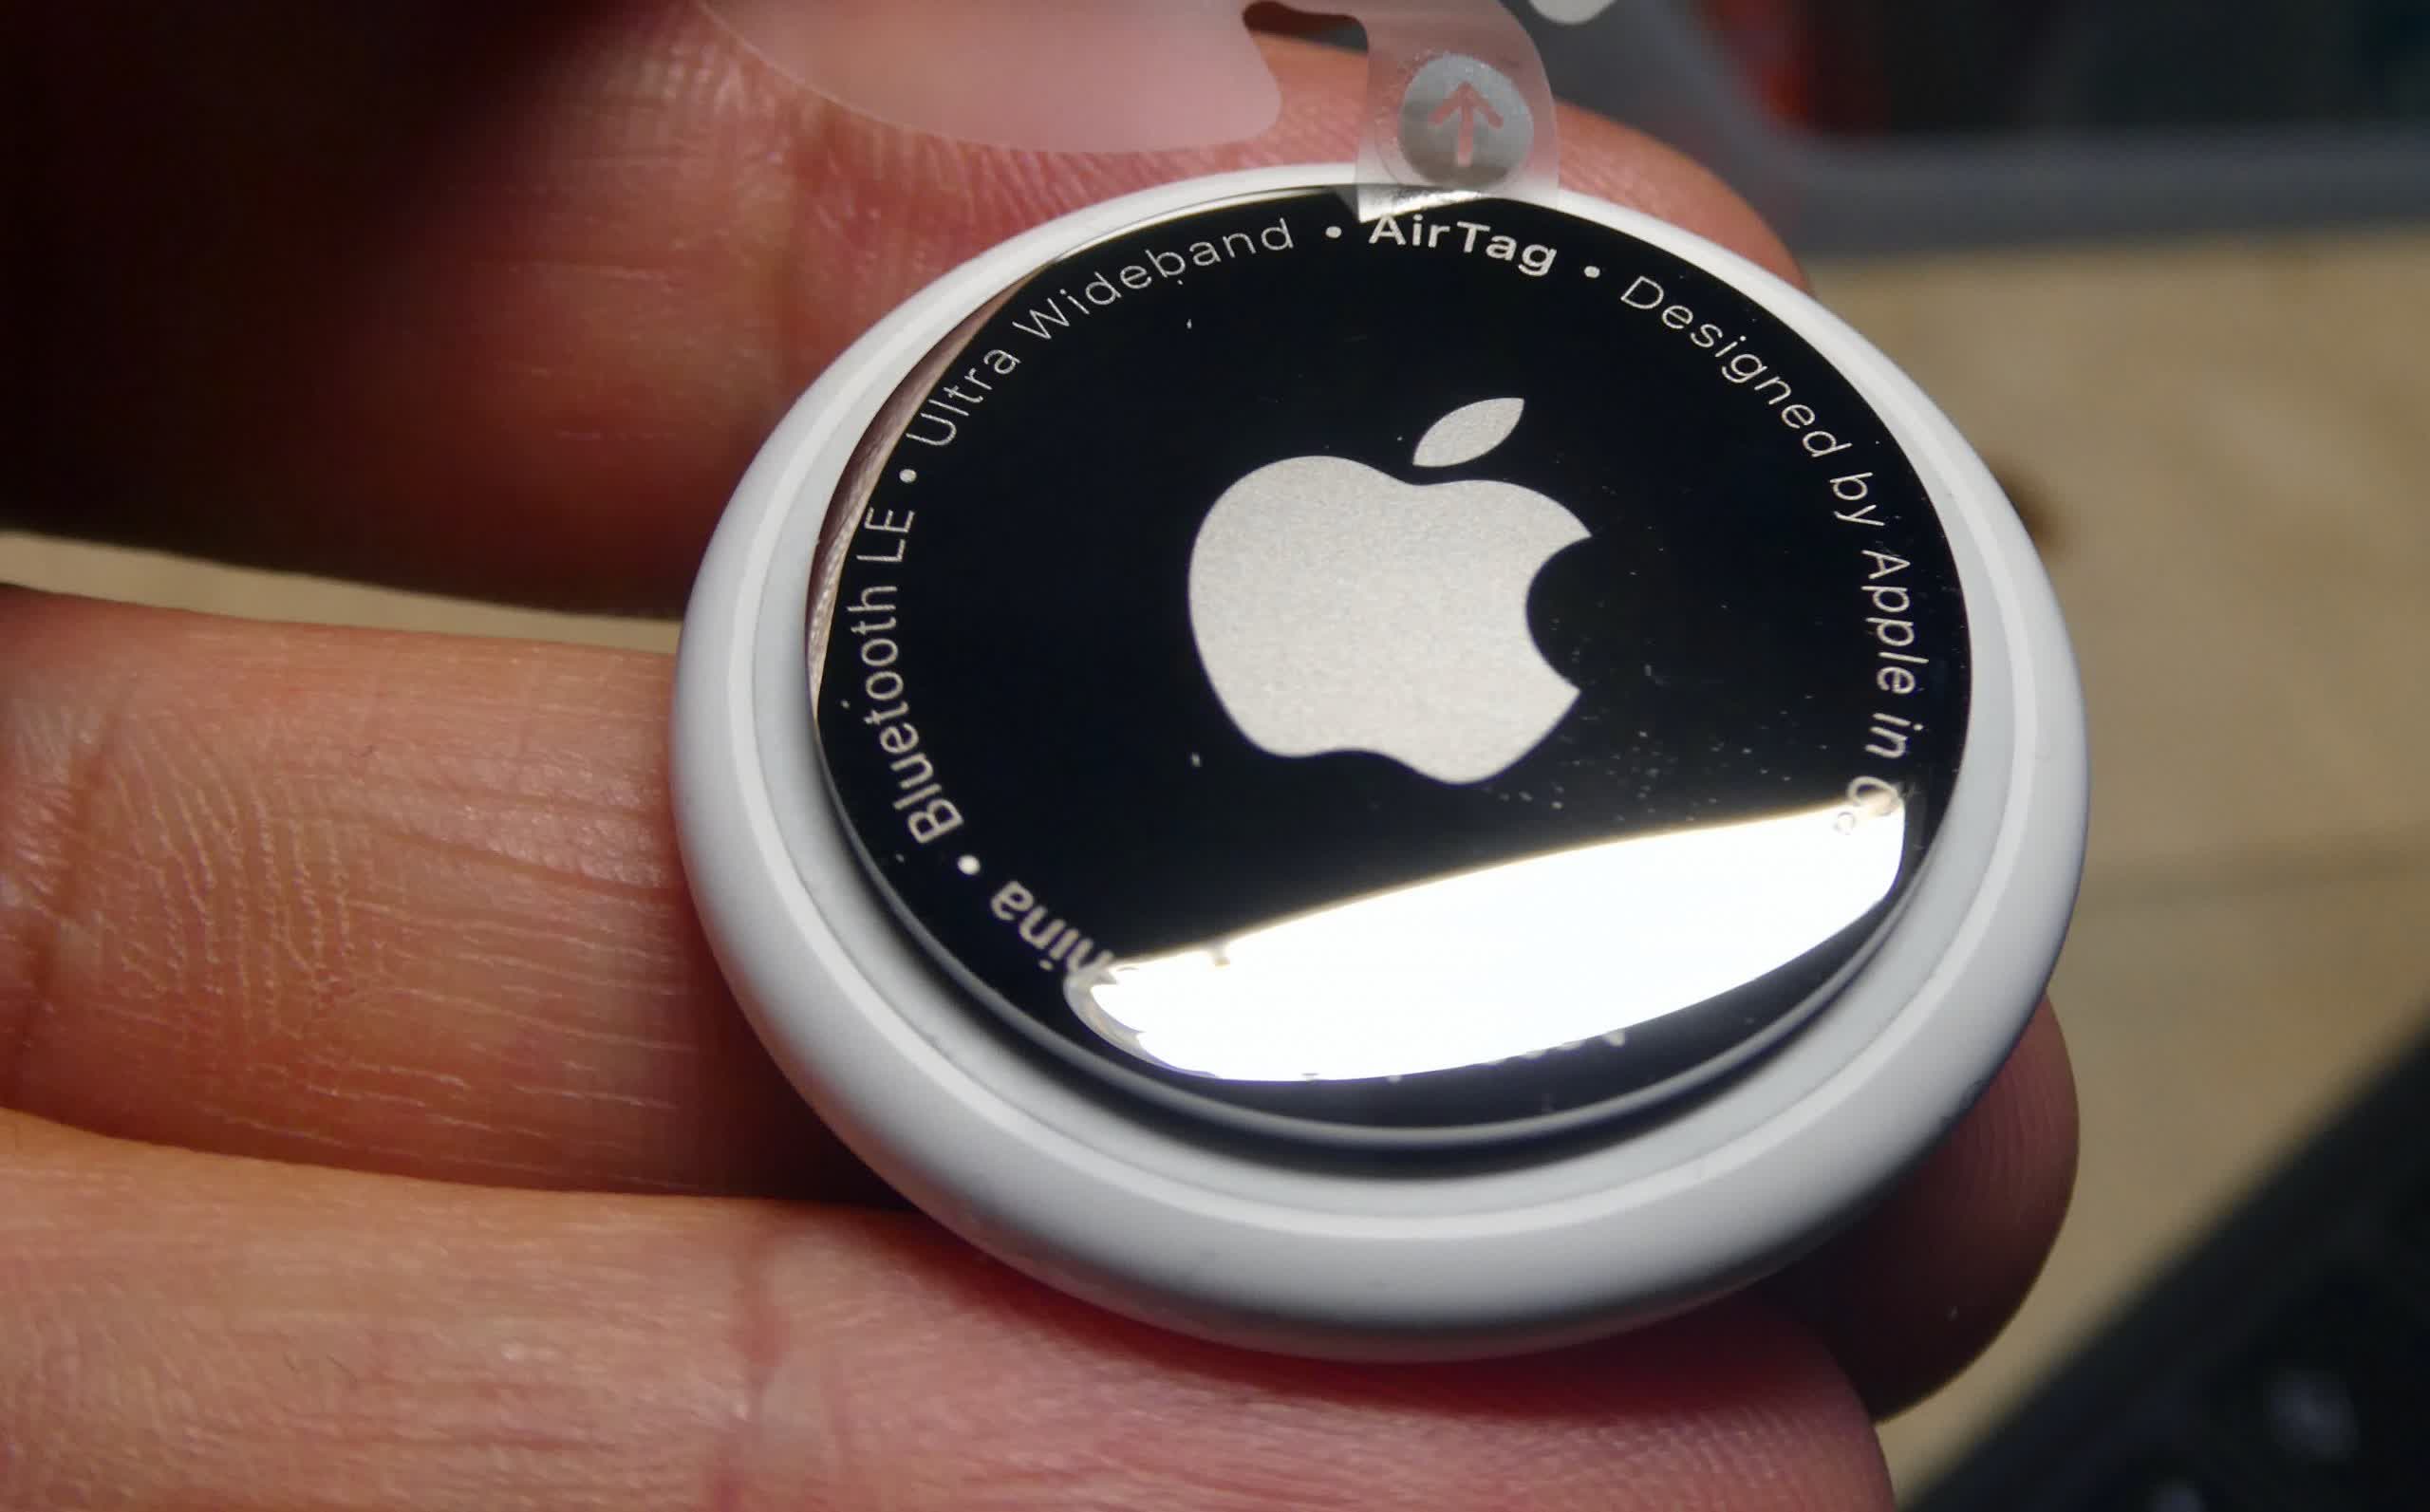 Carjackers are using Apple AirTags to track high-end vehicles to steal them later